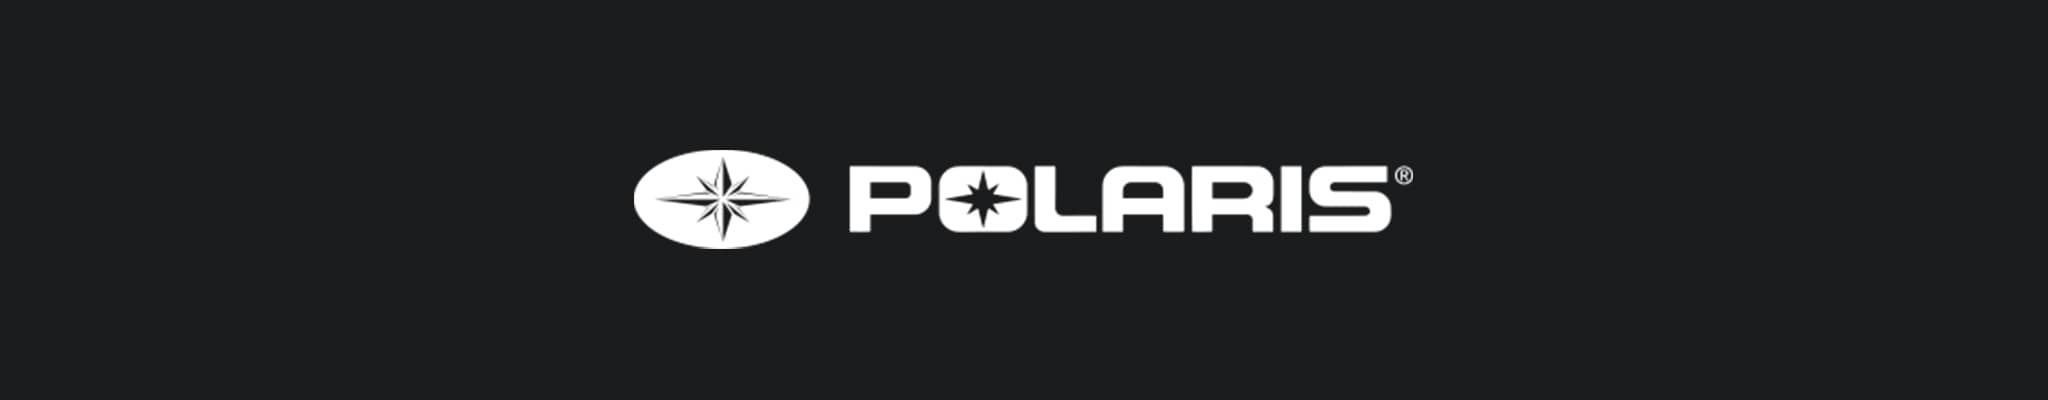 The Polaris logo in white on a black background, featured alongside the text on the Perfex website.